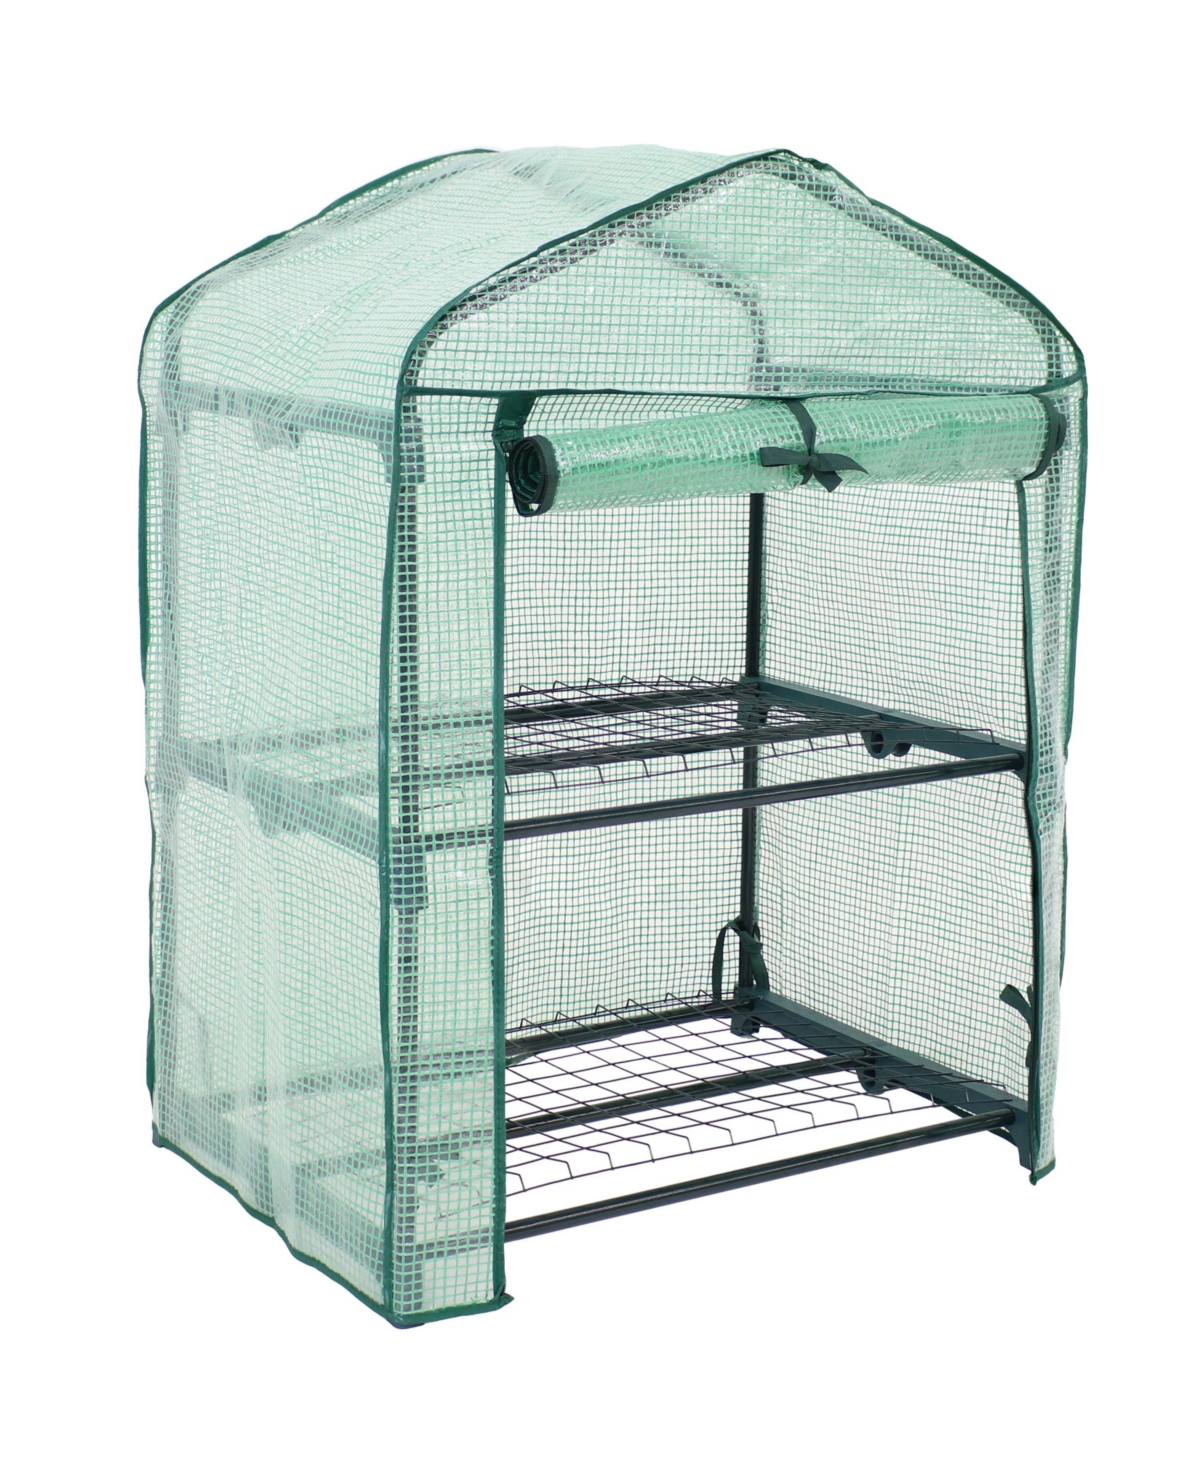 2-Tier Steel Pvc Cover Mini Greenhouse and Roll-Up Zipper - Green - Green